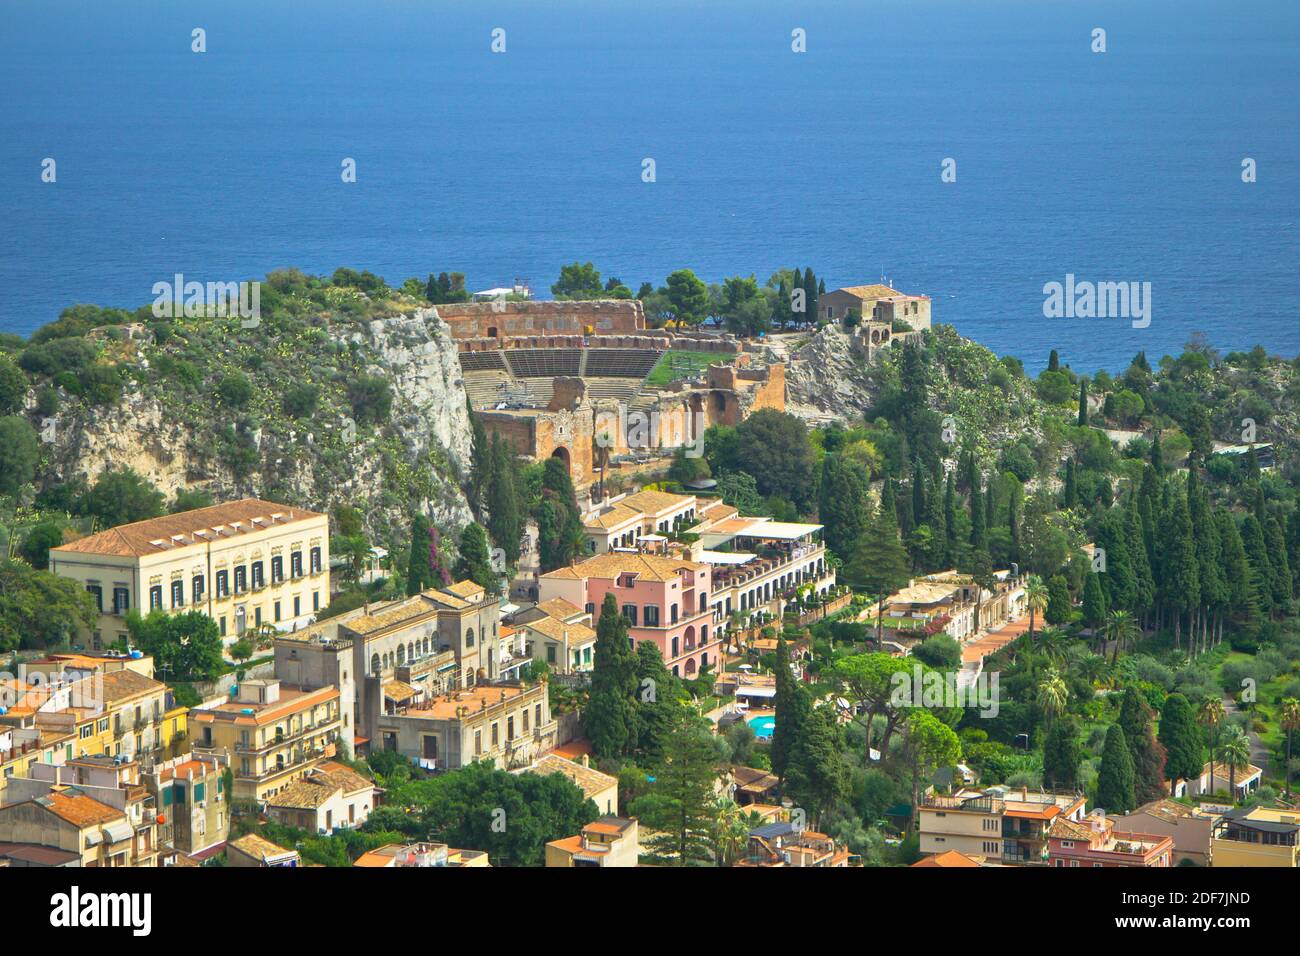 Taormina is a hilltop town on the east coast of Sicily. It sits near Mount Etna, an active volcano with trails leading to the summit. Stock Photo